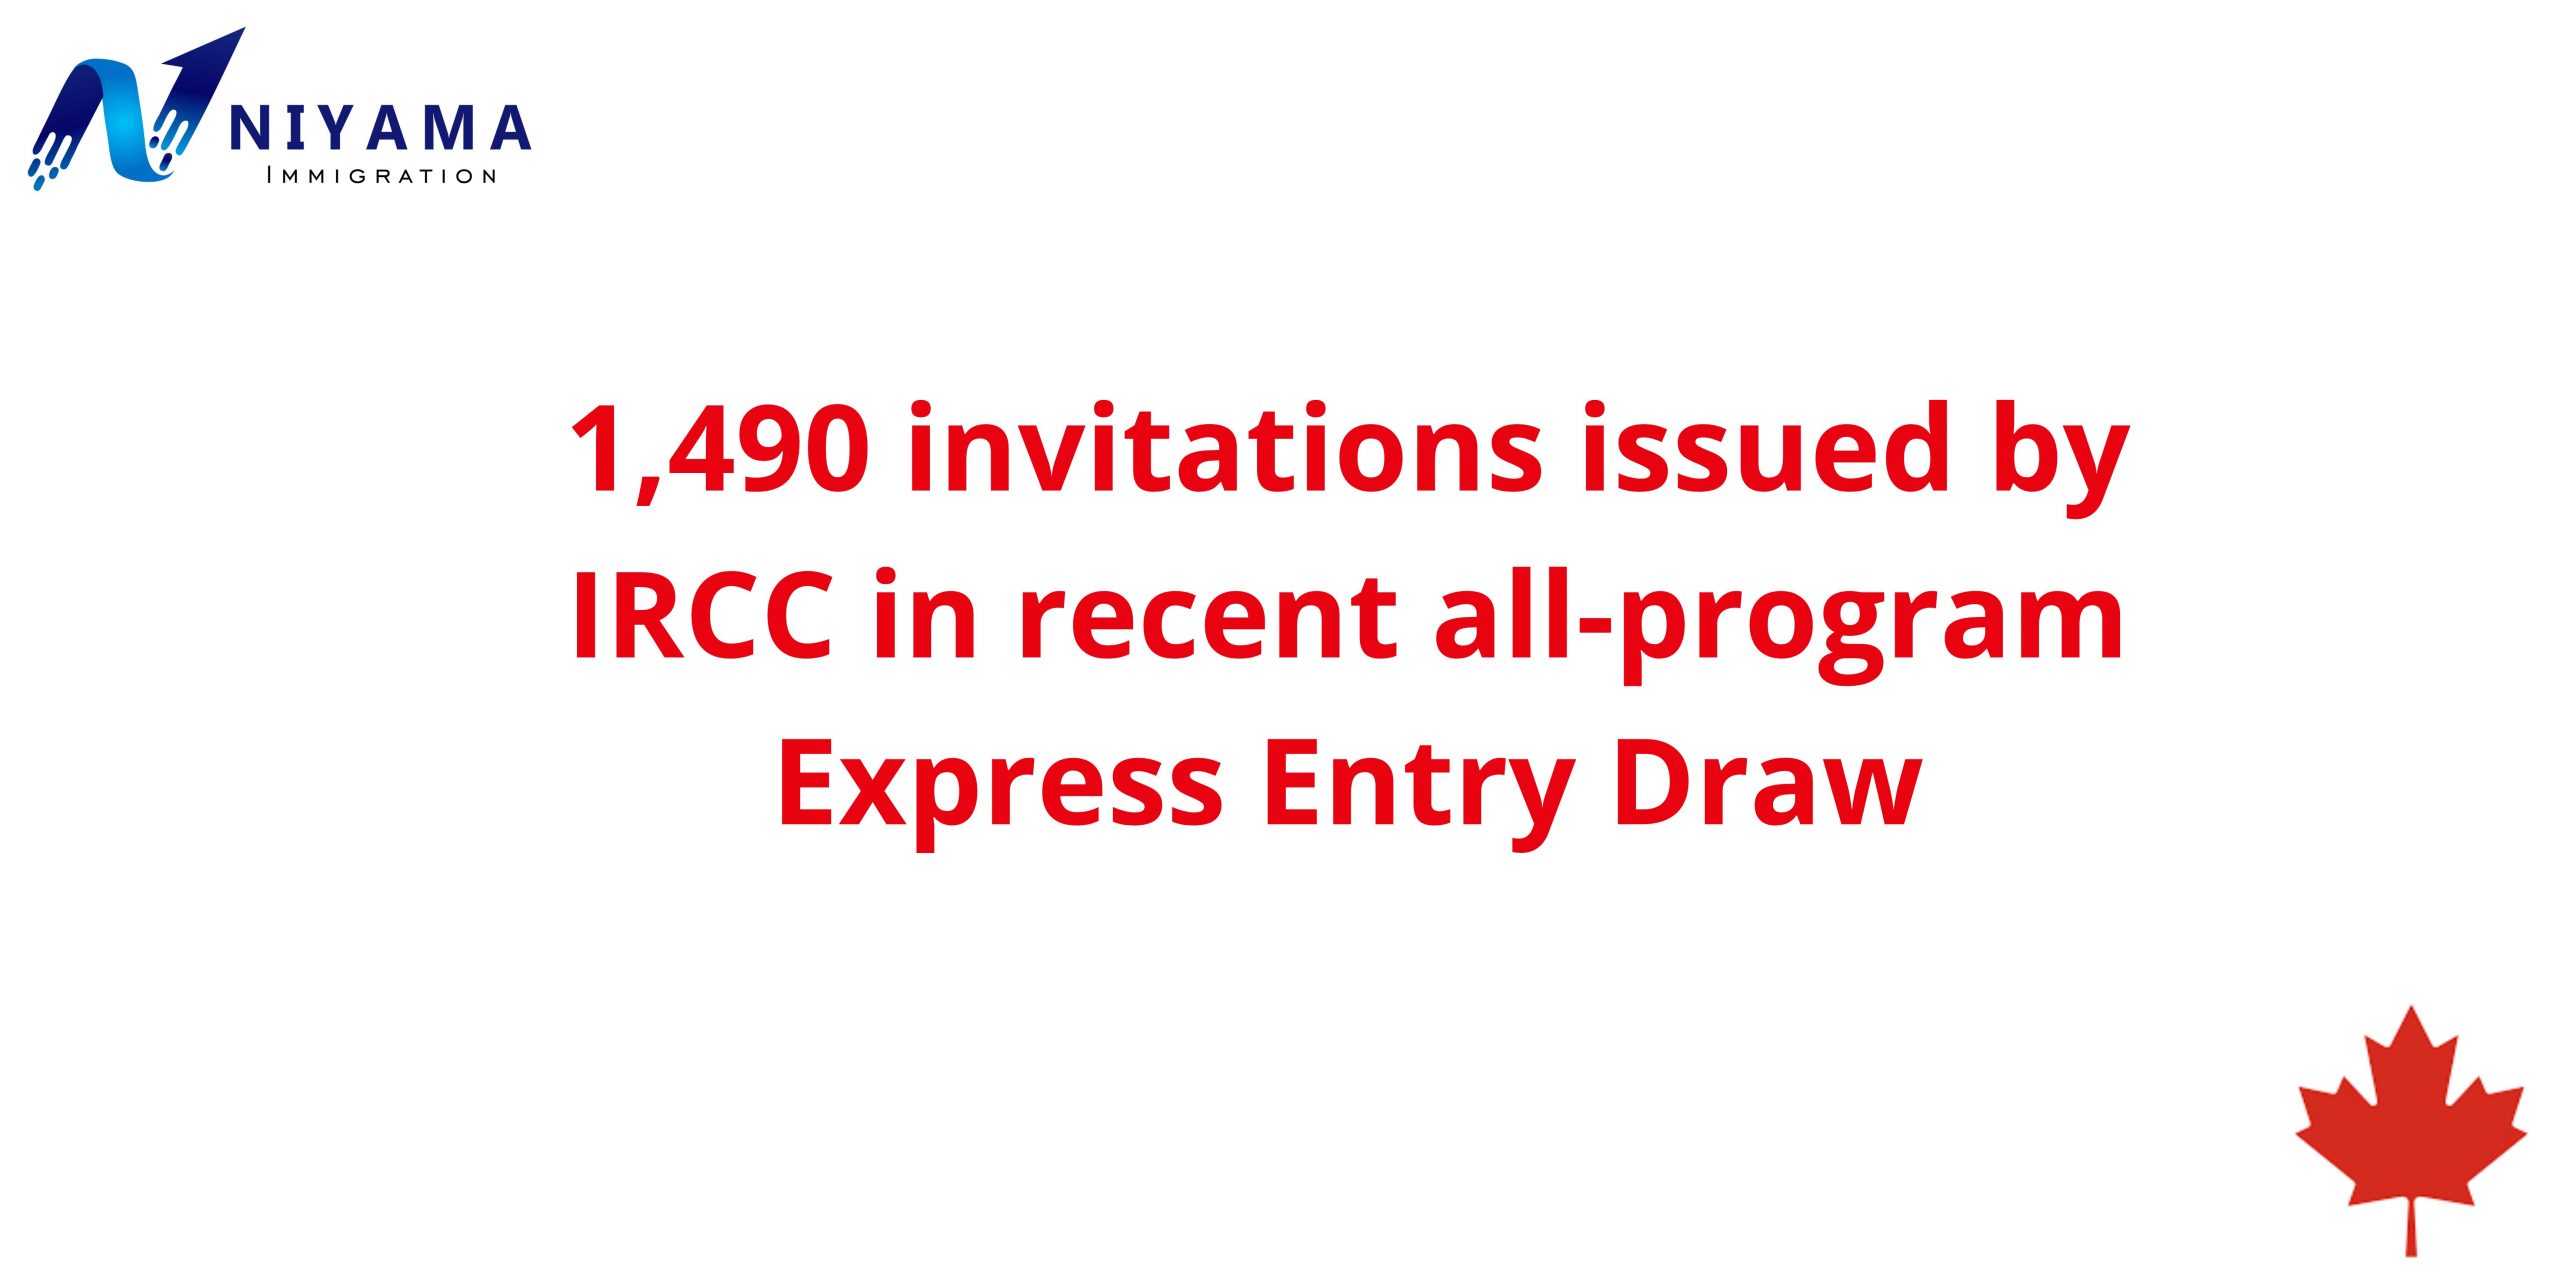 Express Entry Draw: 1,490 New Applications Invited